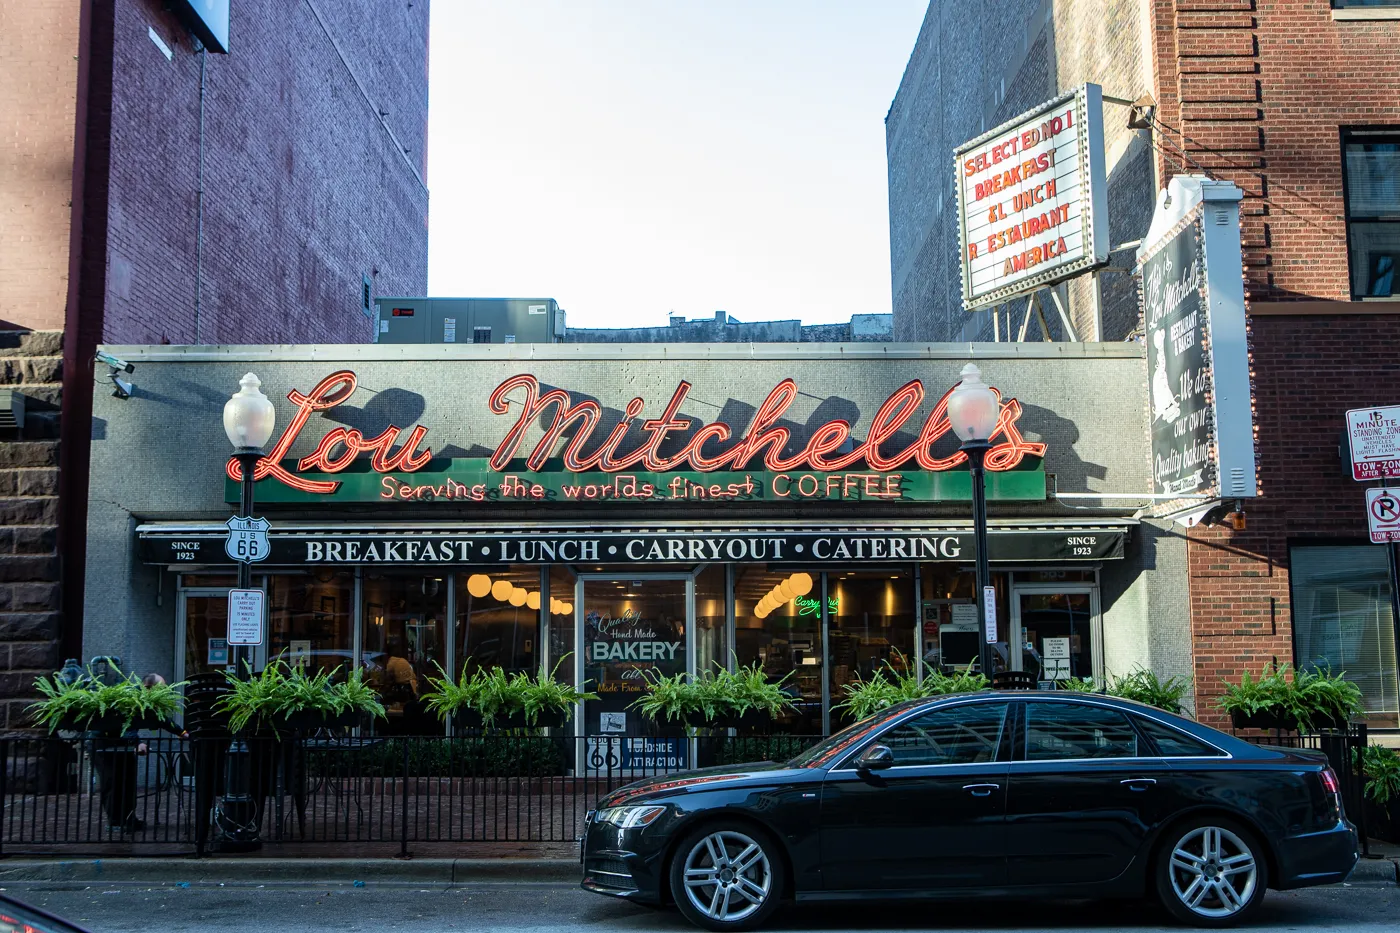 Lou Mitchell's Restaurant on Route 66 in Chicago, Illinois